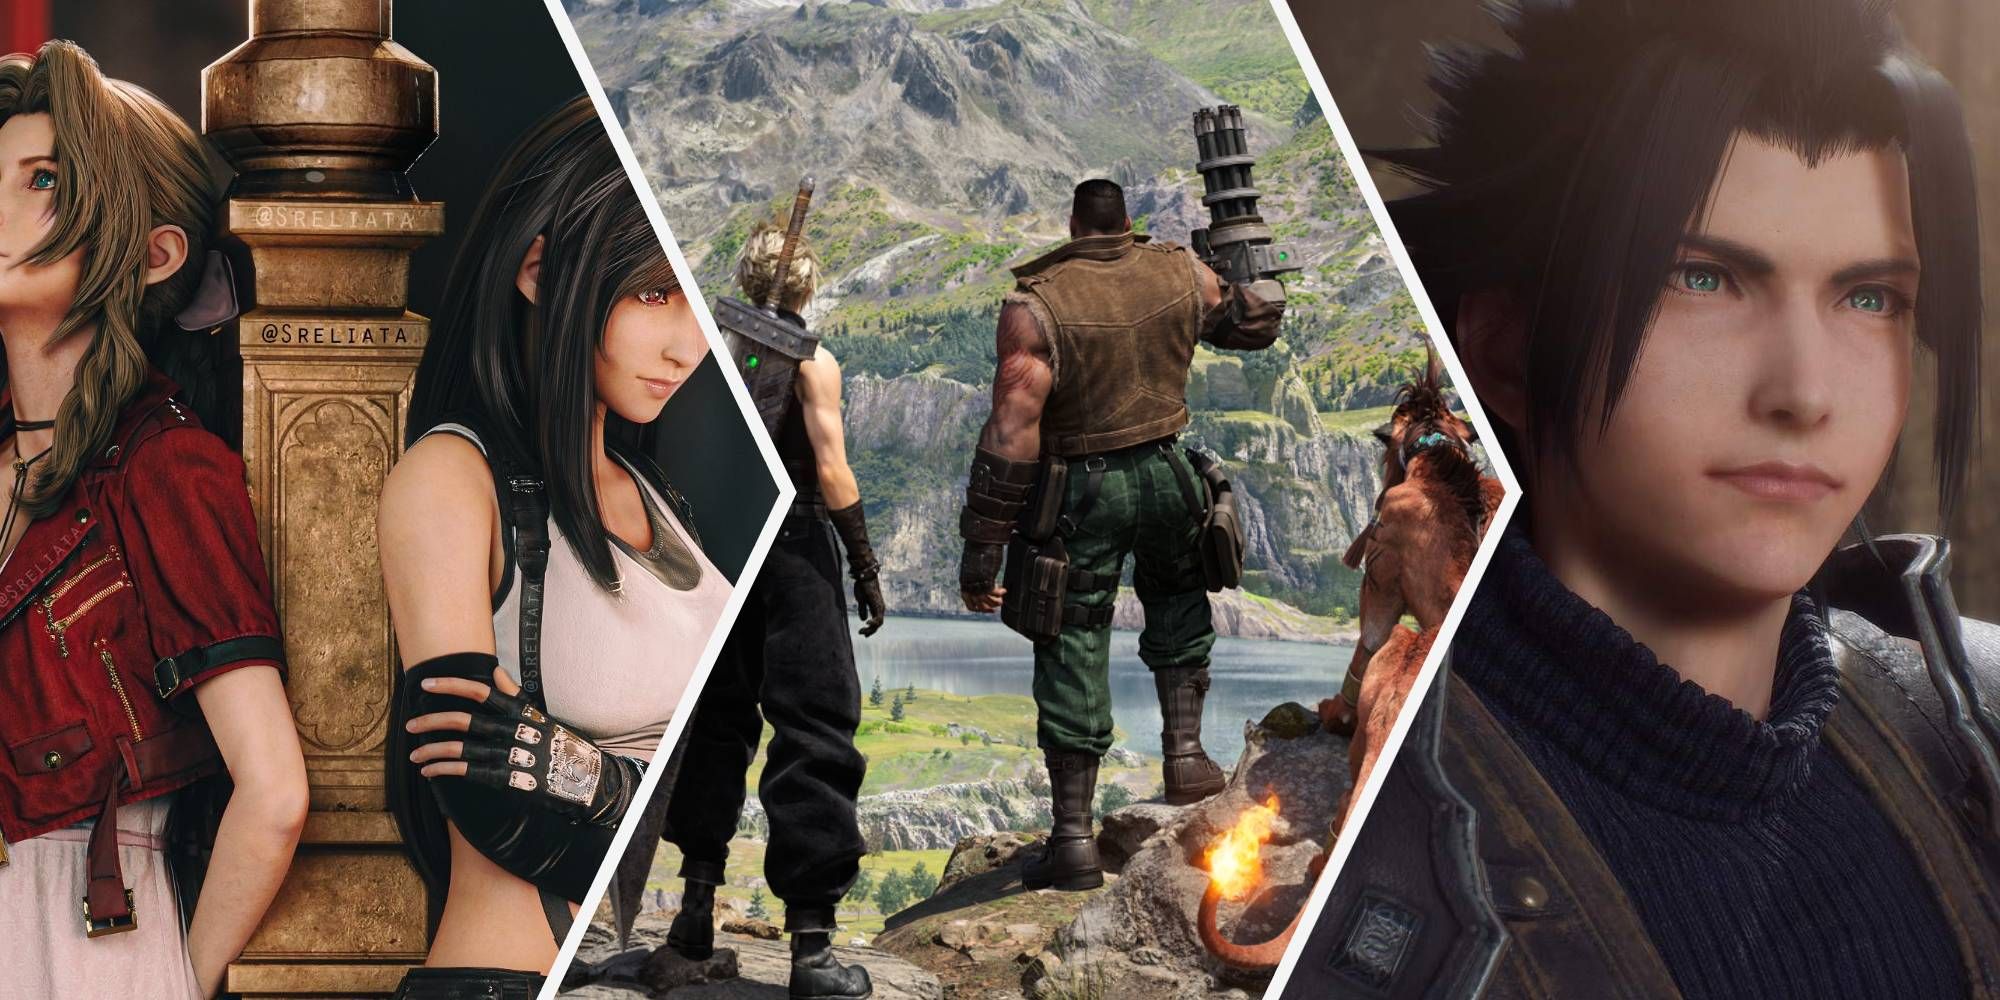 FF7 Rebirth: What To Play, Revisit, And Skip Before The Sequel